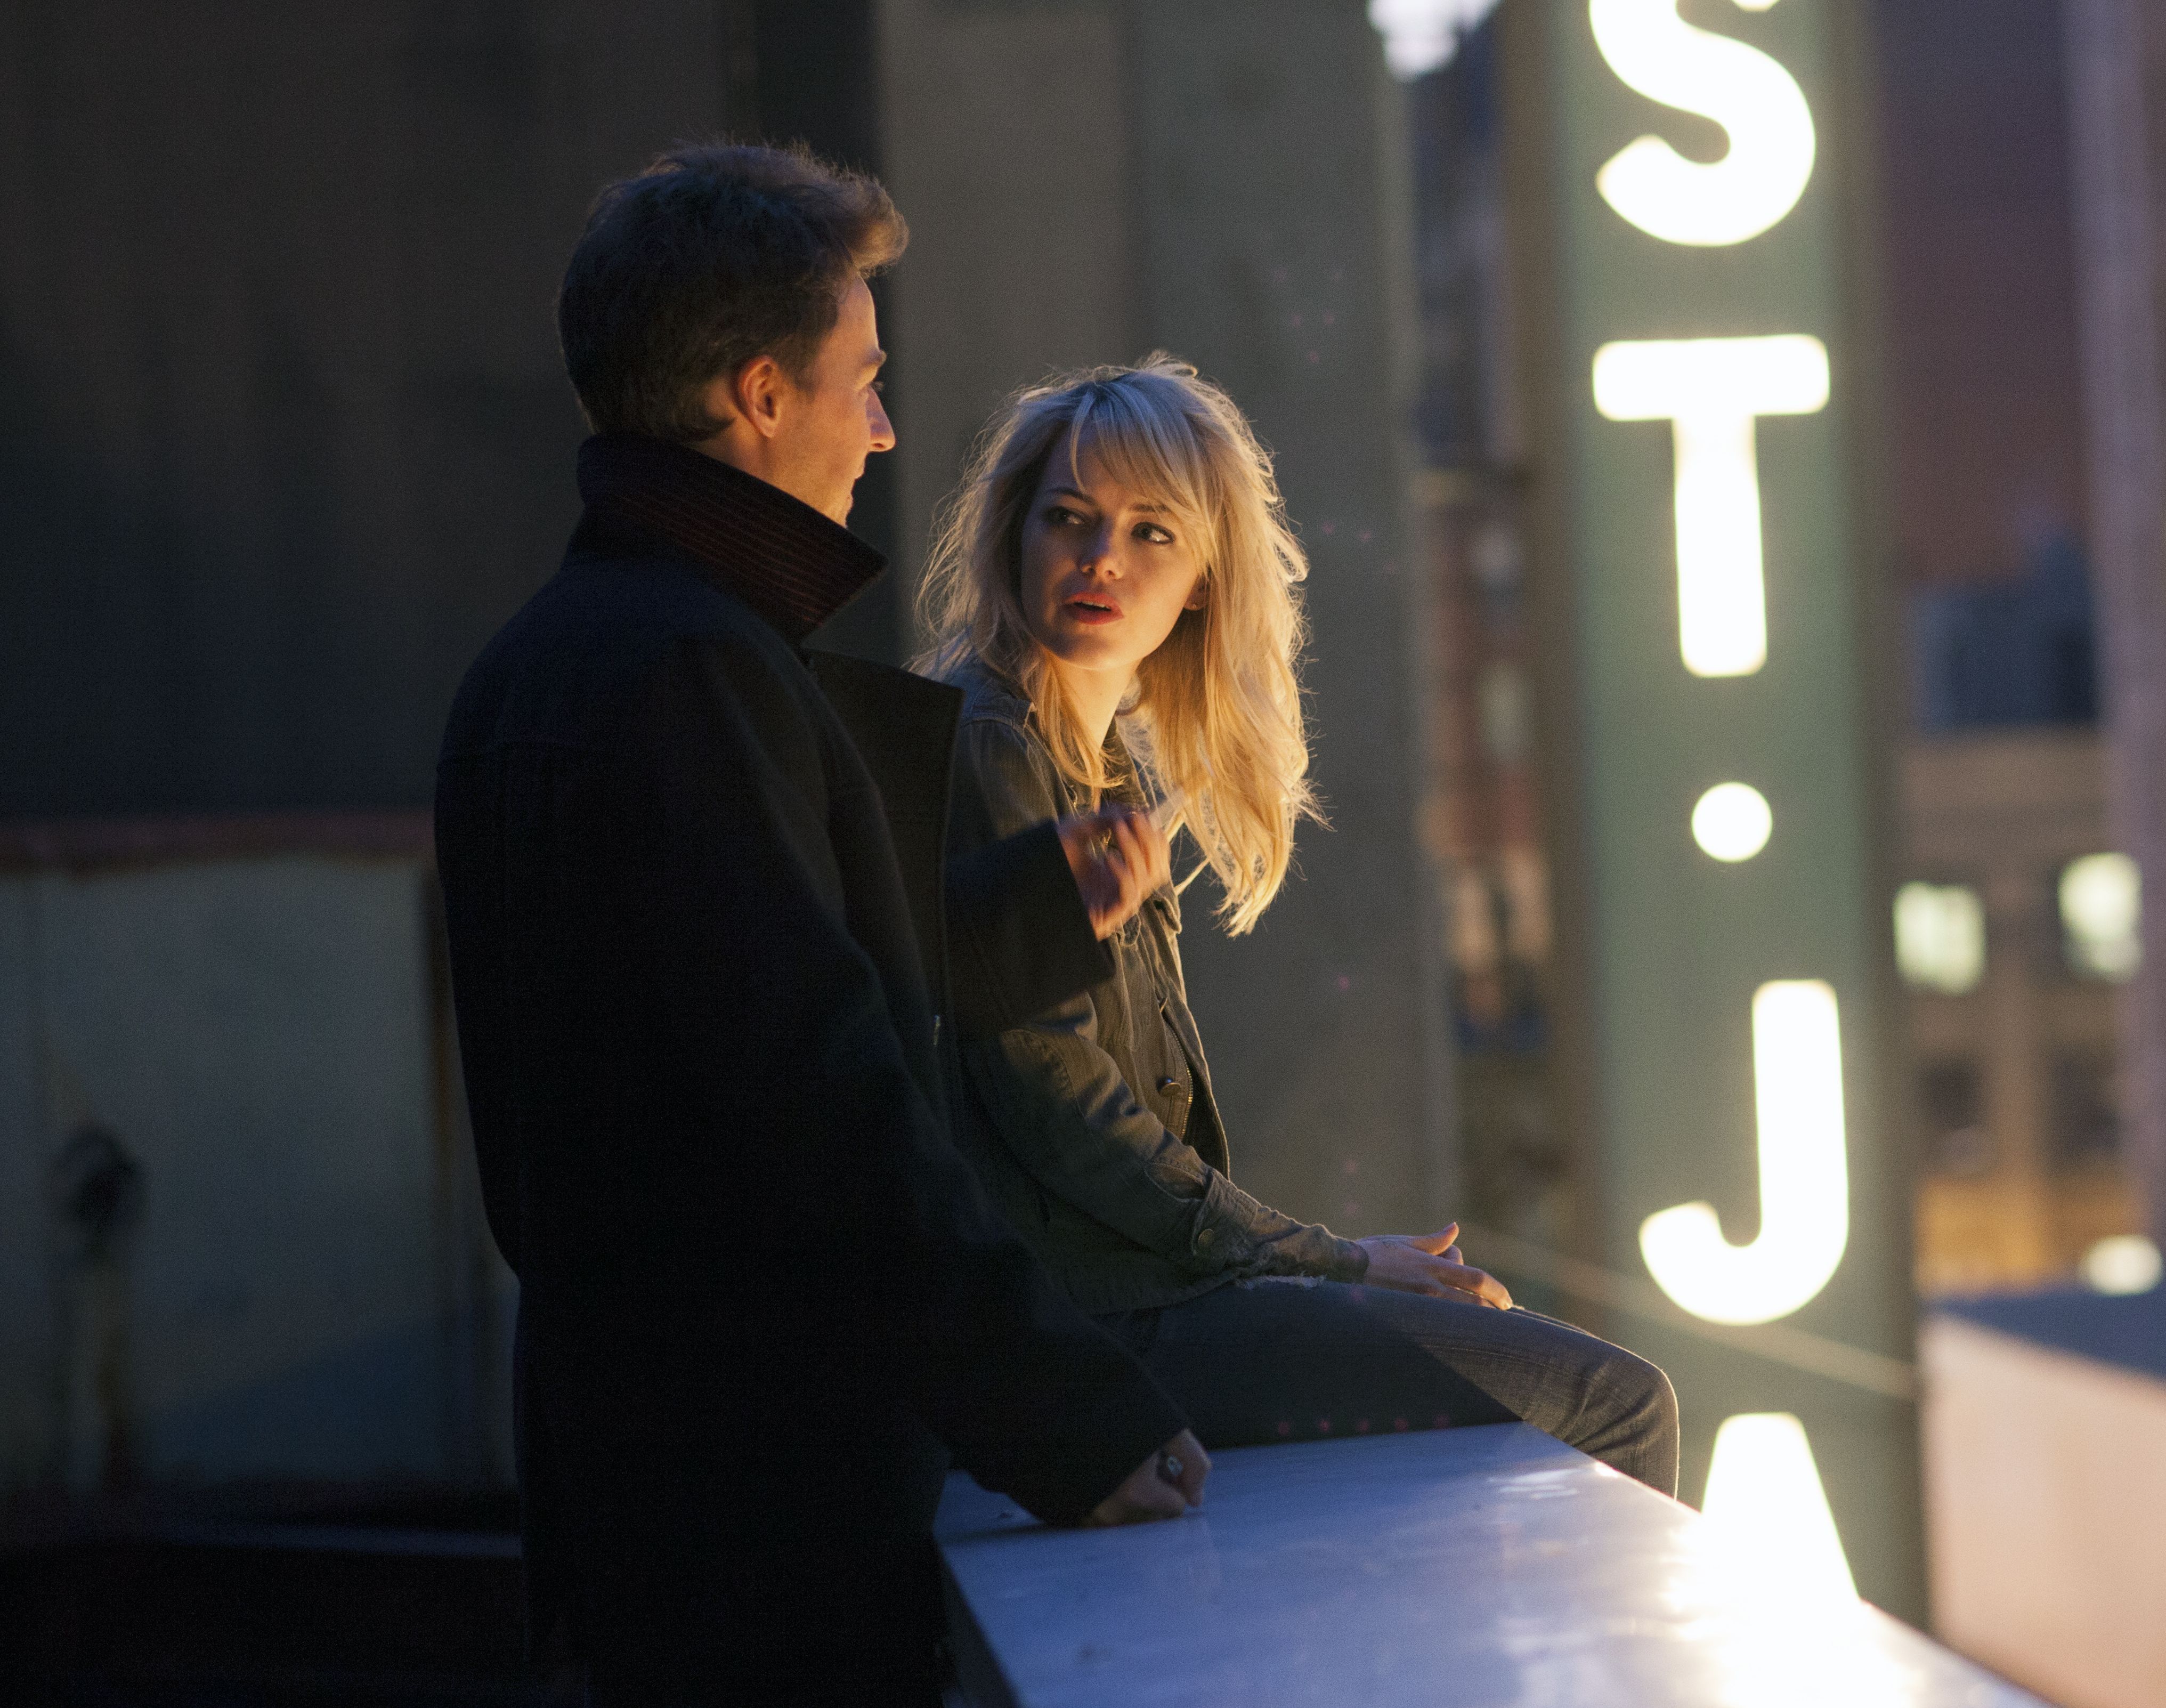 Edward Norton and Emma Stone on the rooftop in Birdman